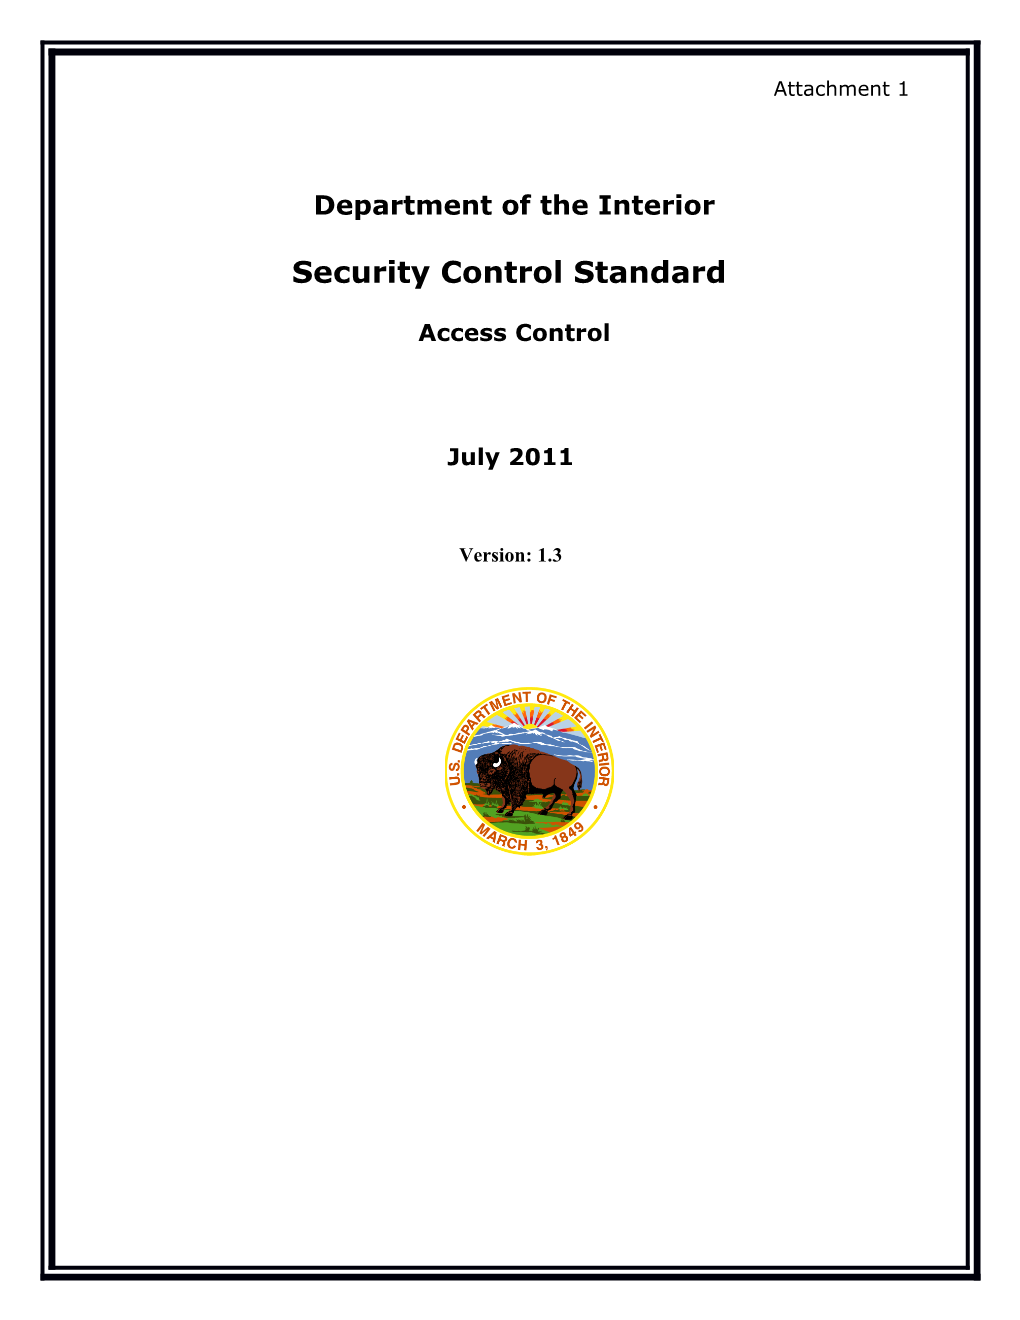 Department of the Interior Security Control Standard Access Control